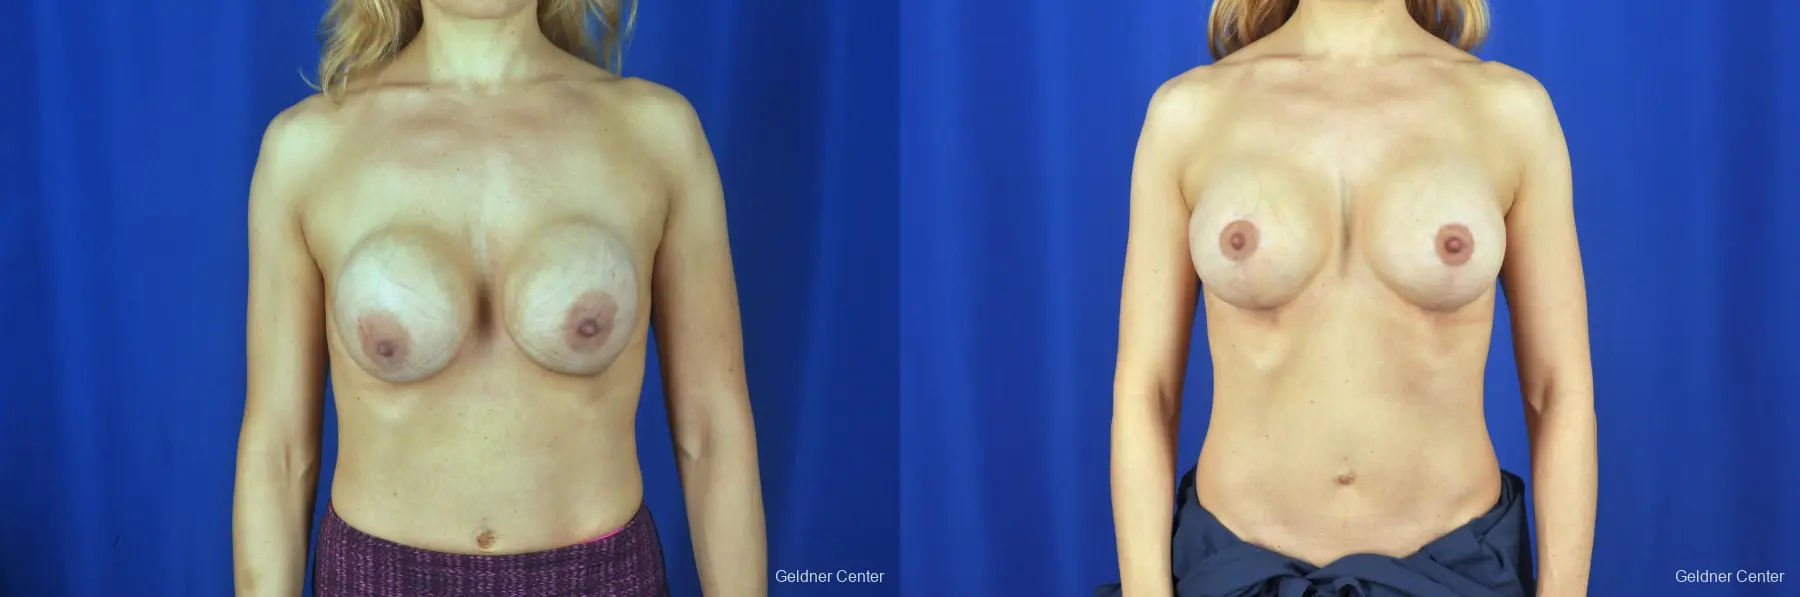 Chicago Breast Lift 2072 - Before and After